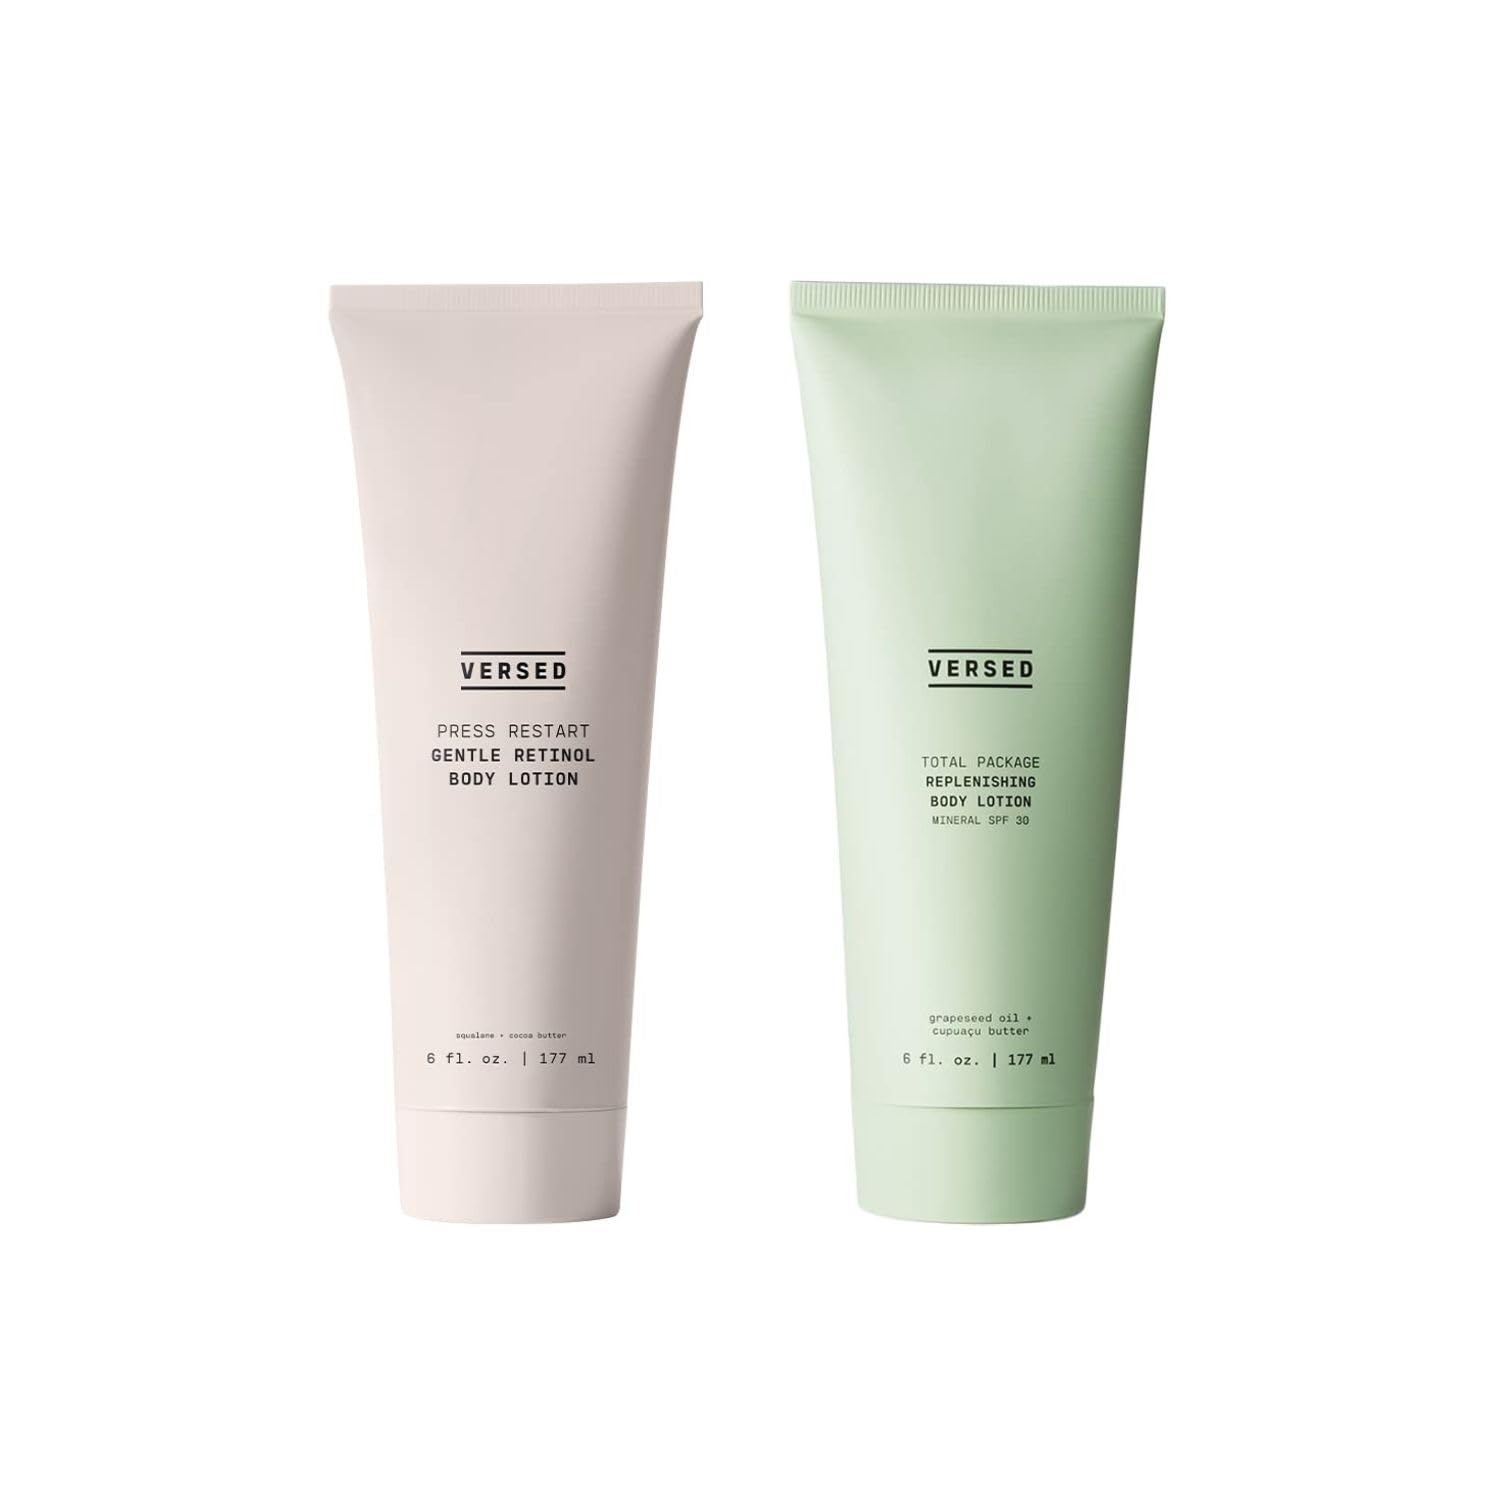 Versed Body Lotion Duo - Press Restart Gentle Body Lotion & Total Package Replenishing Body Lotion with Mineral SPF 30 Sun Protection (2 Products, 6 oz Each)